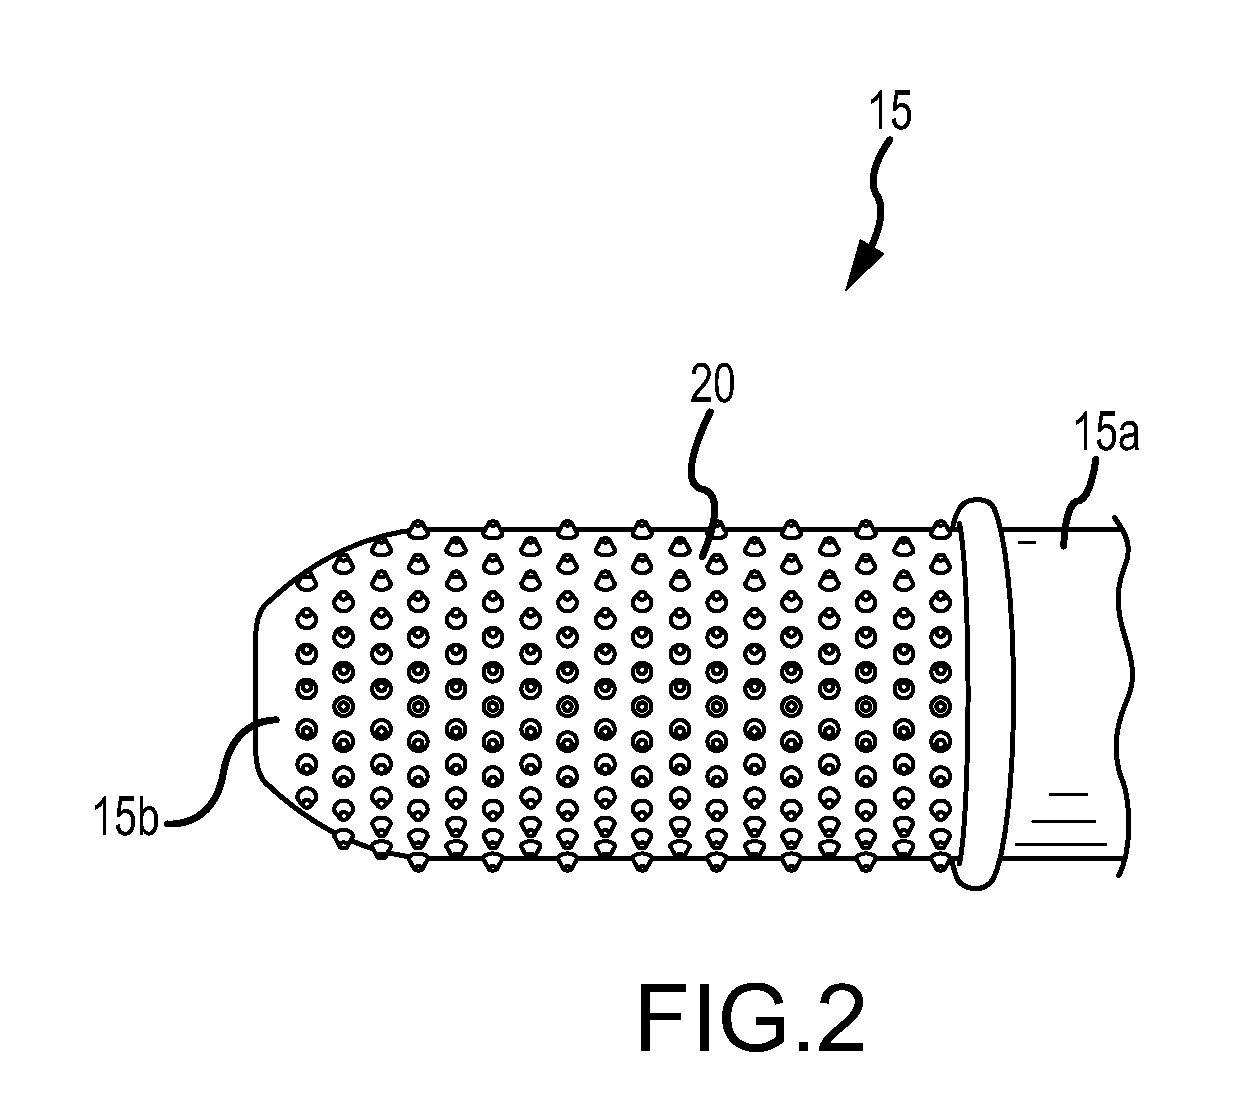 Touch-Free Medical Instrument Sanitation Station And Method Thereof